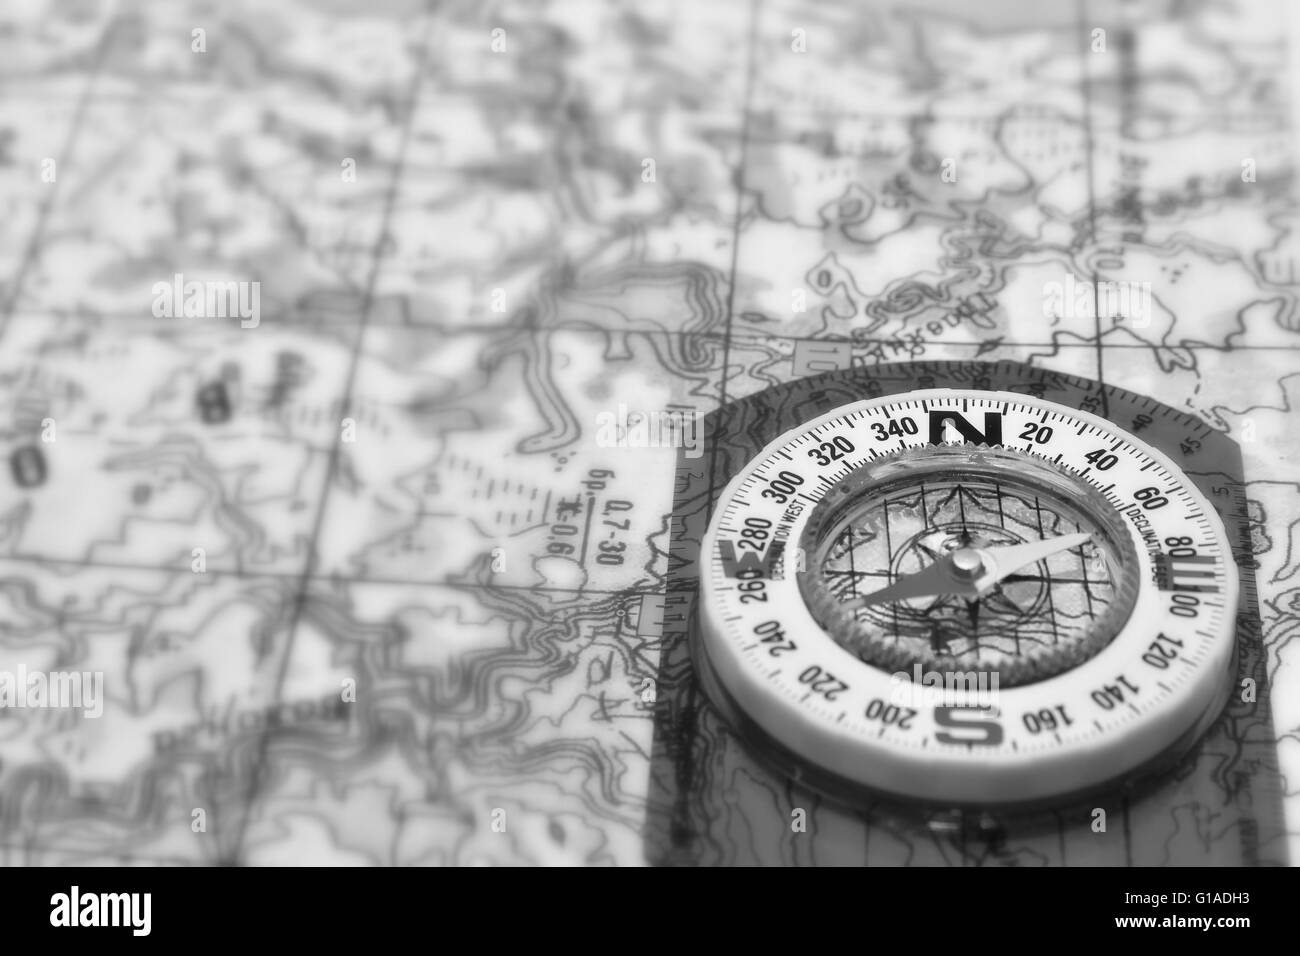 Tools for the journey - a map and a compass. Magnetic compass is located on a topographic map. Stock Photo